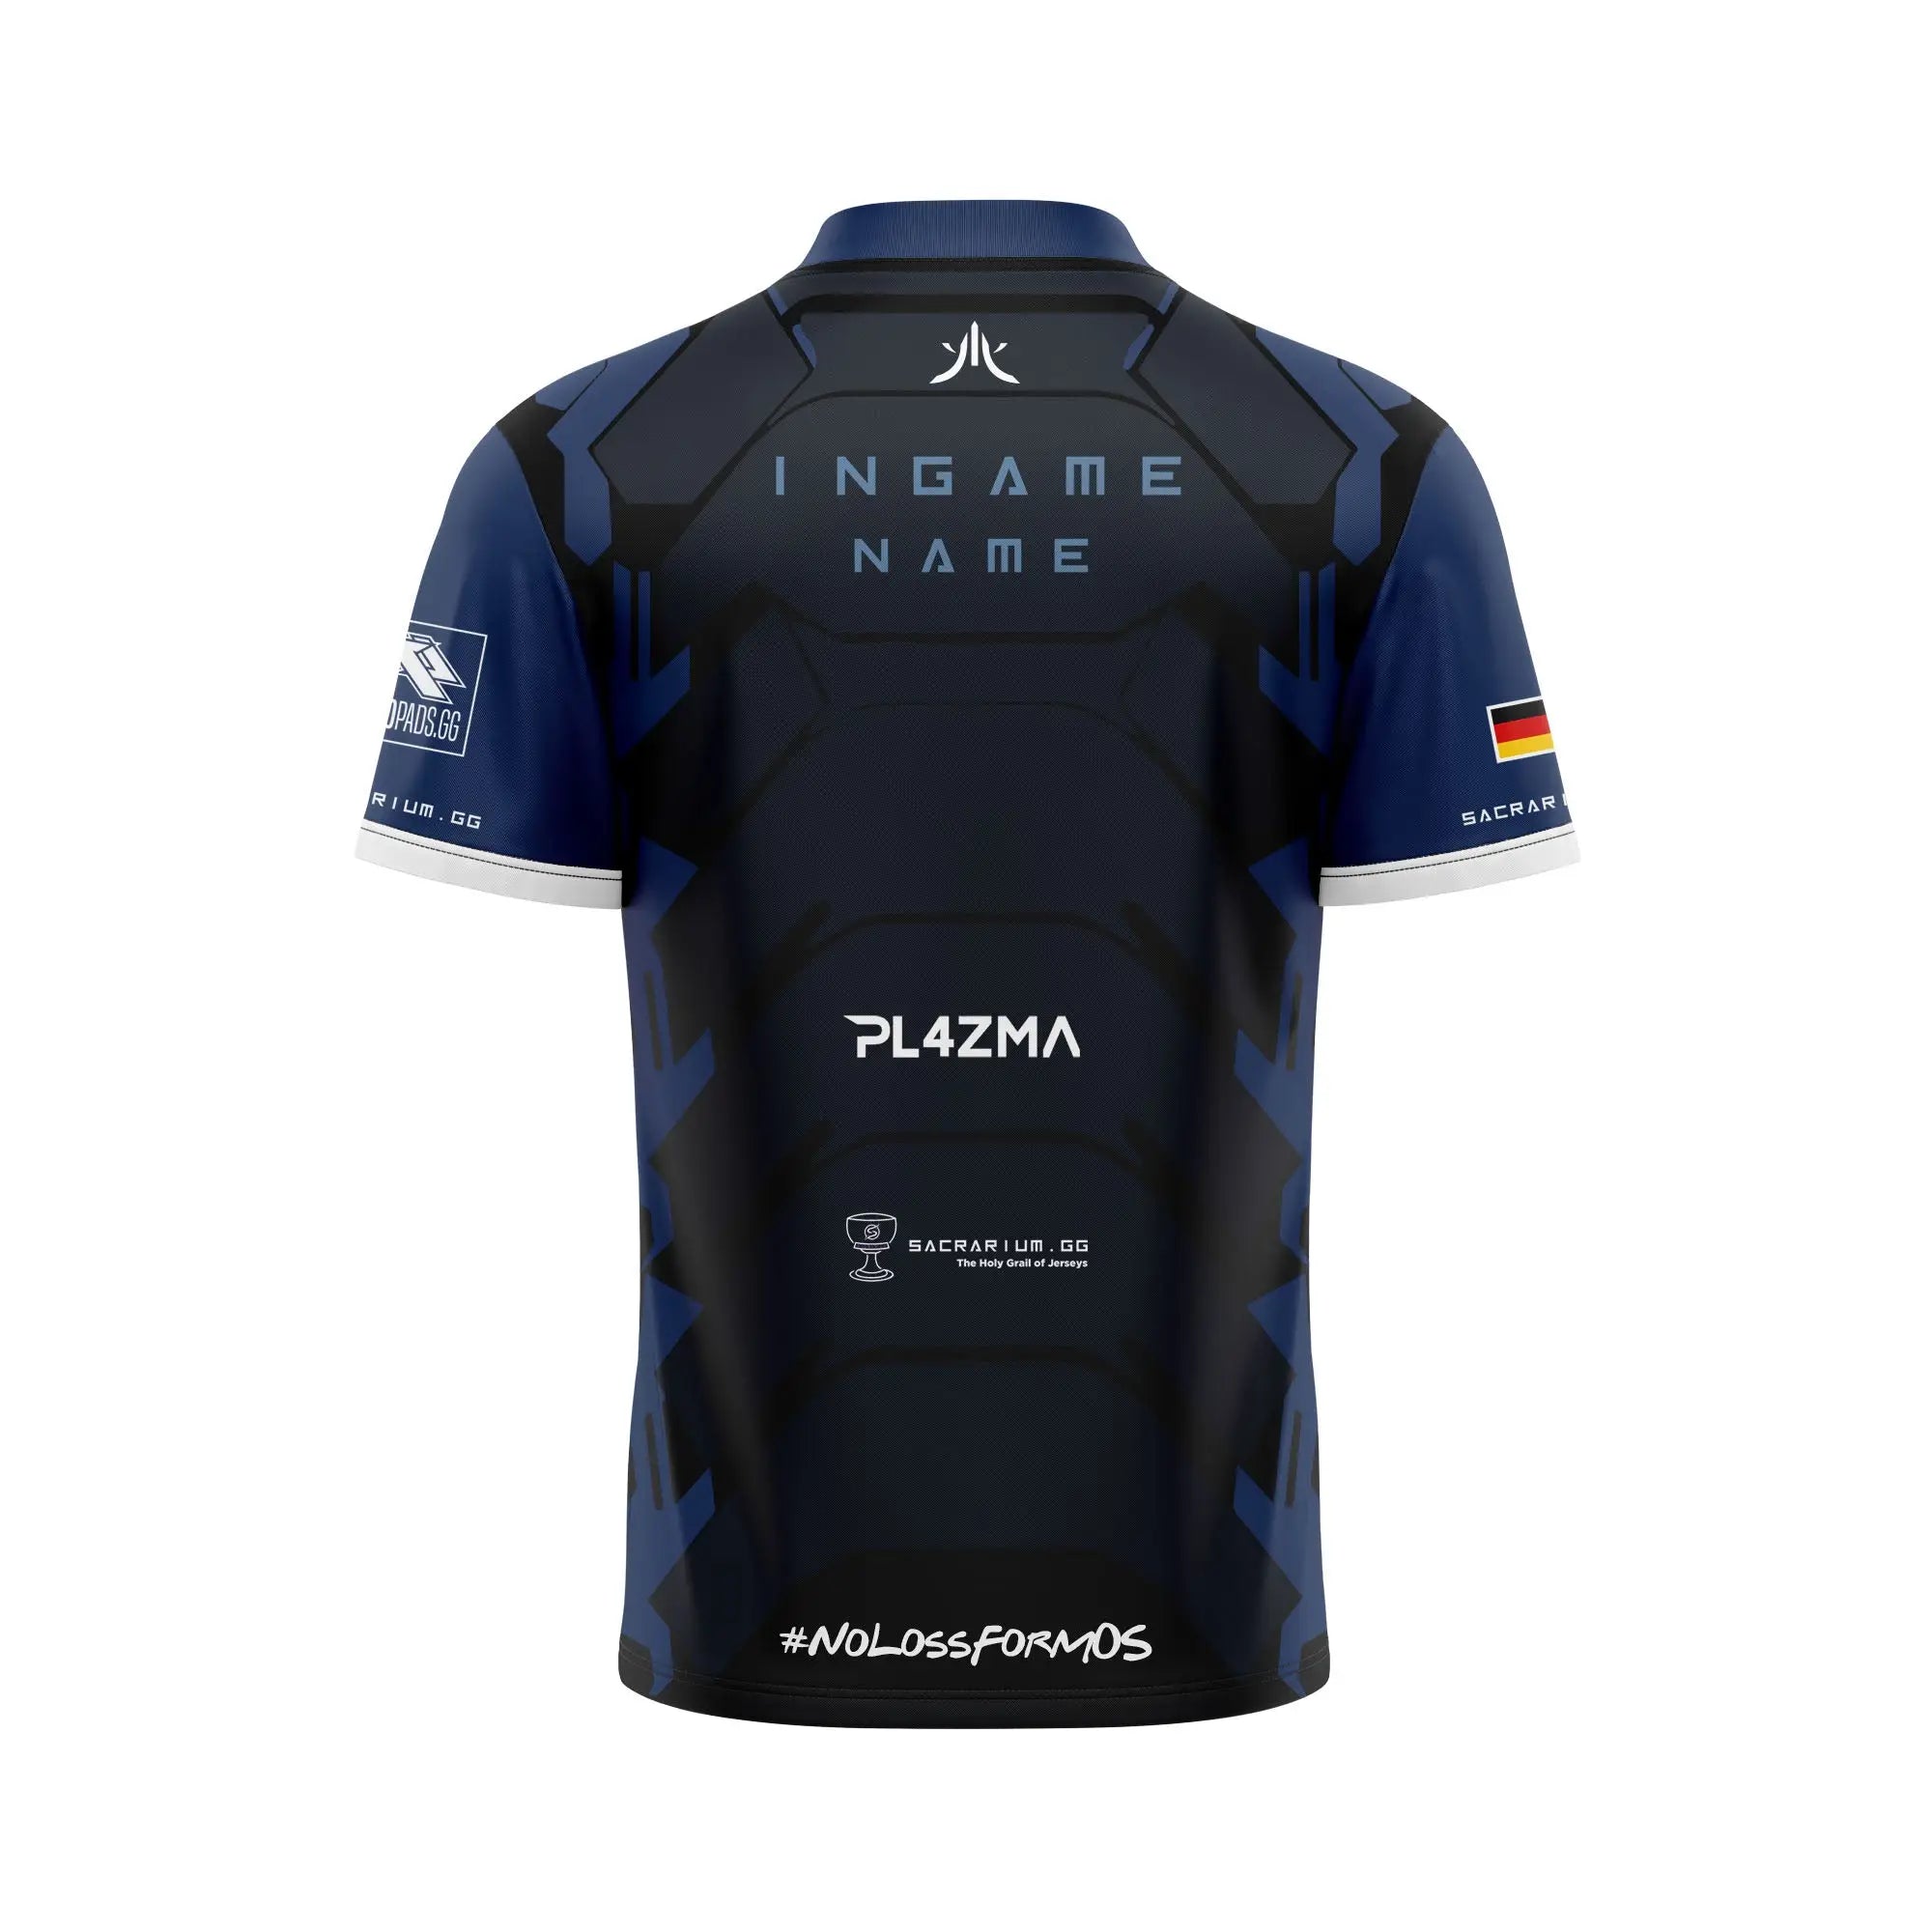 MOS eSports Jersey MADE OF STEEL